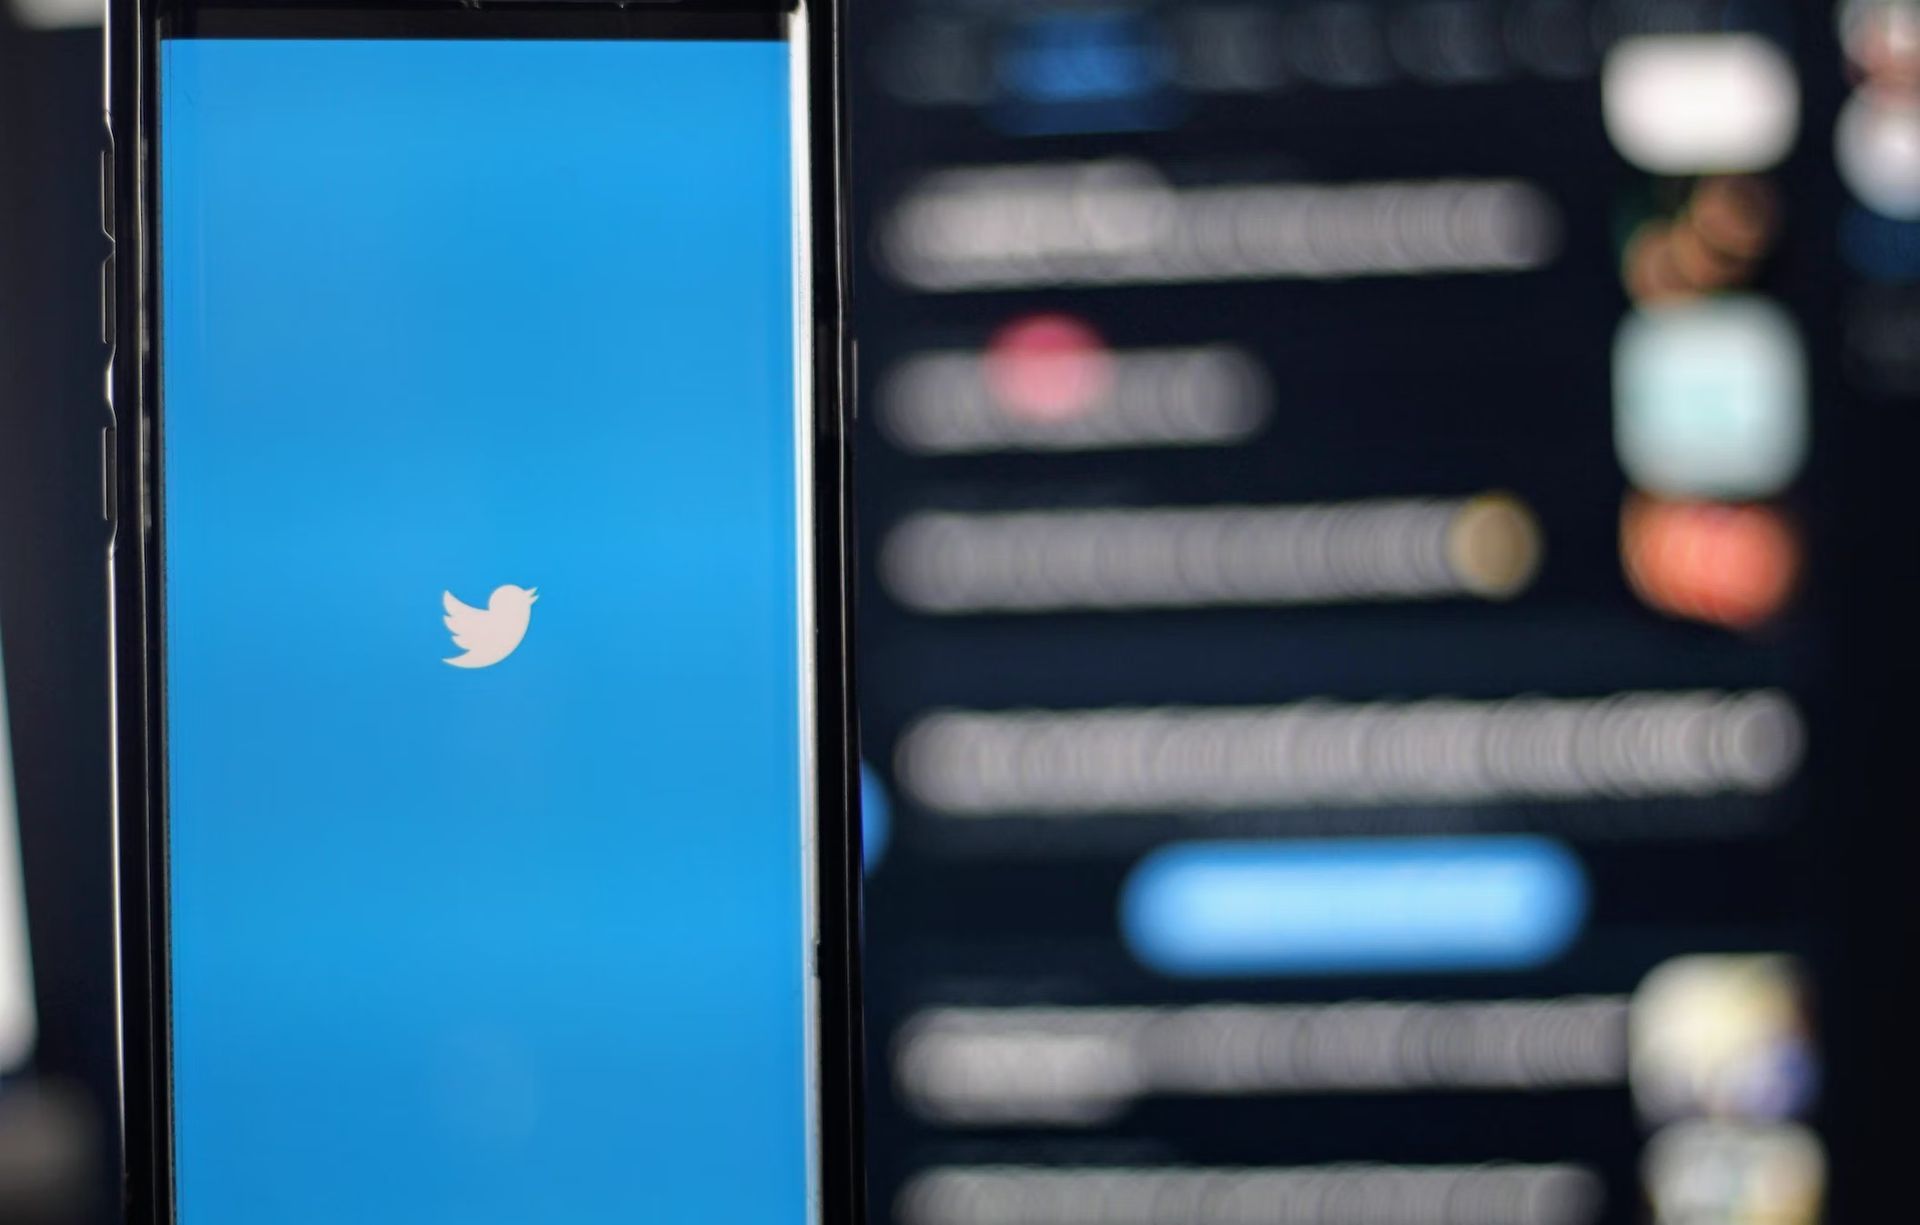 Alleged Cybersecurity Issues Of Twitter Is Causing A Headache For The Firm